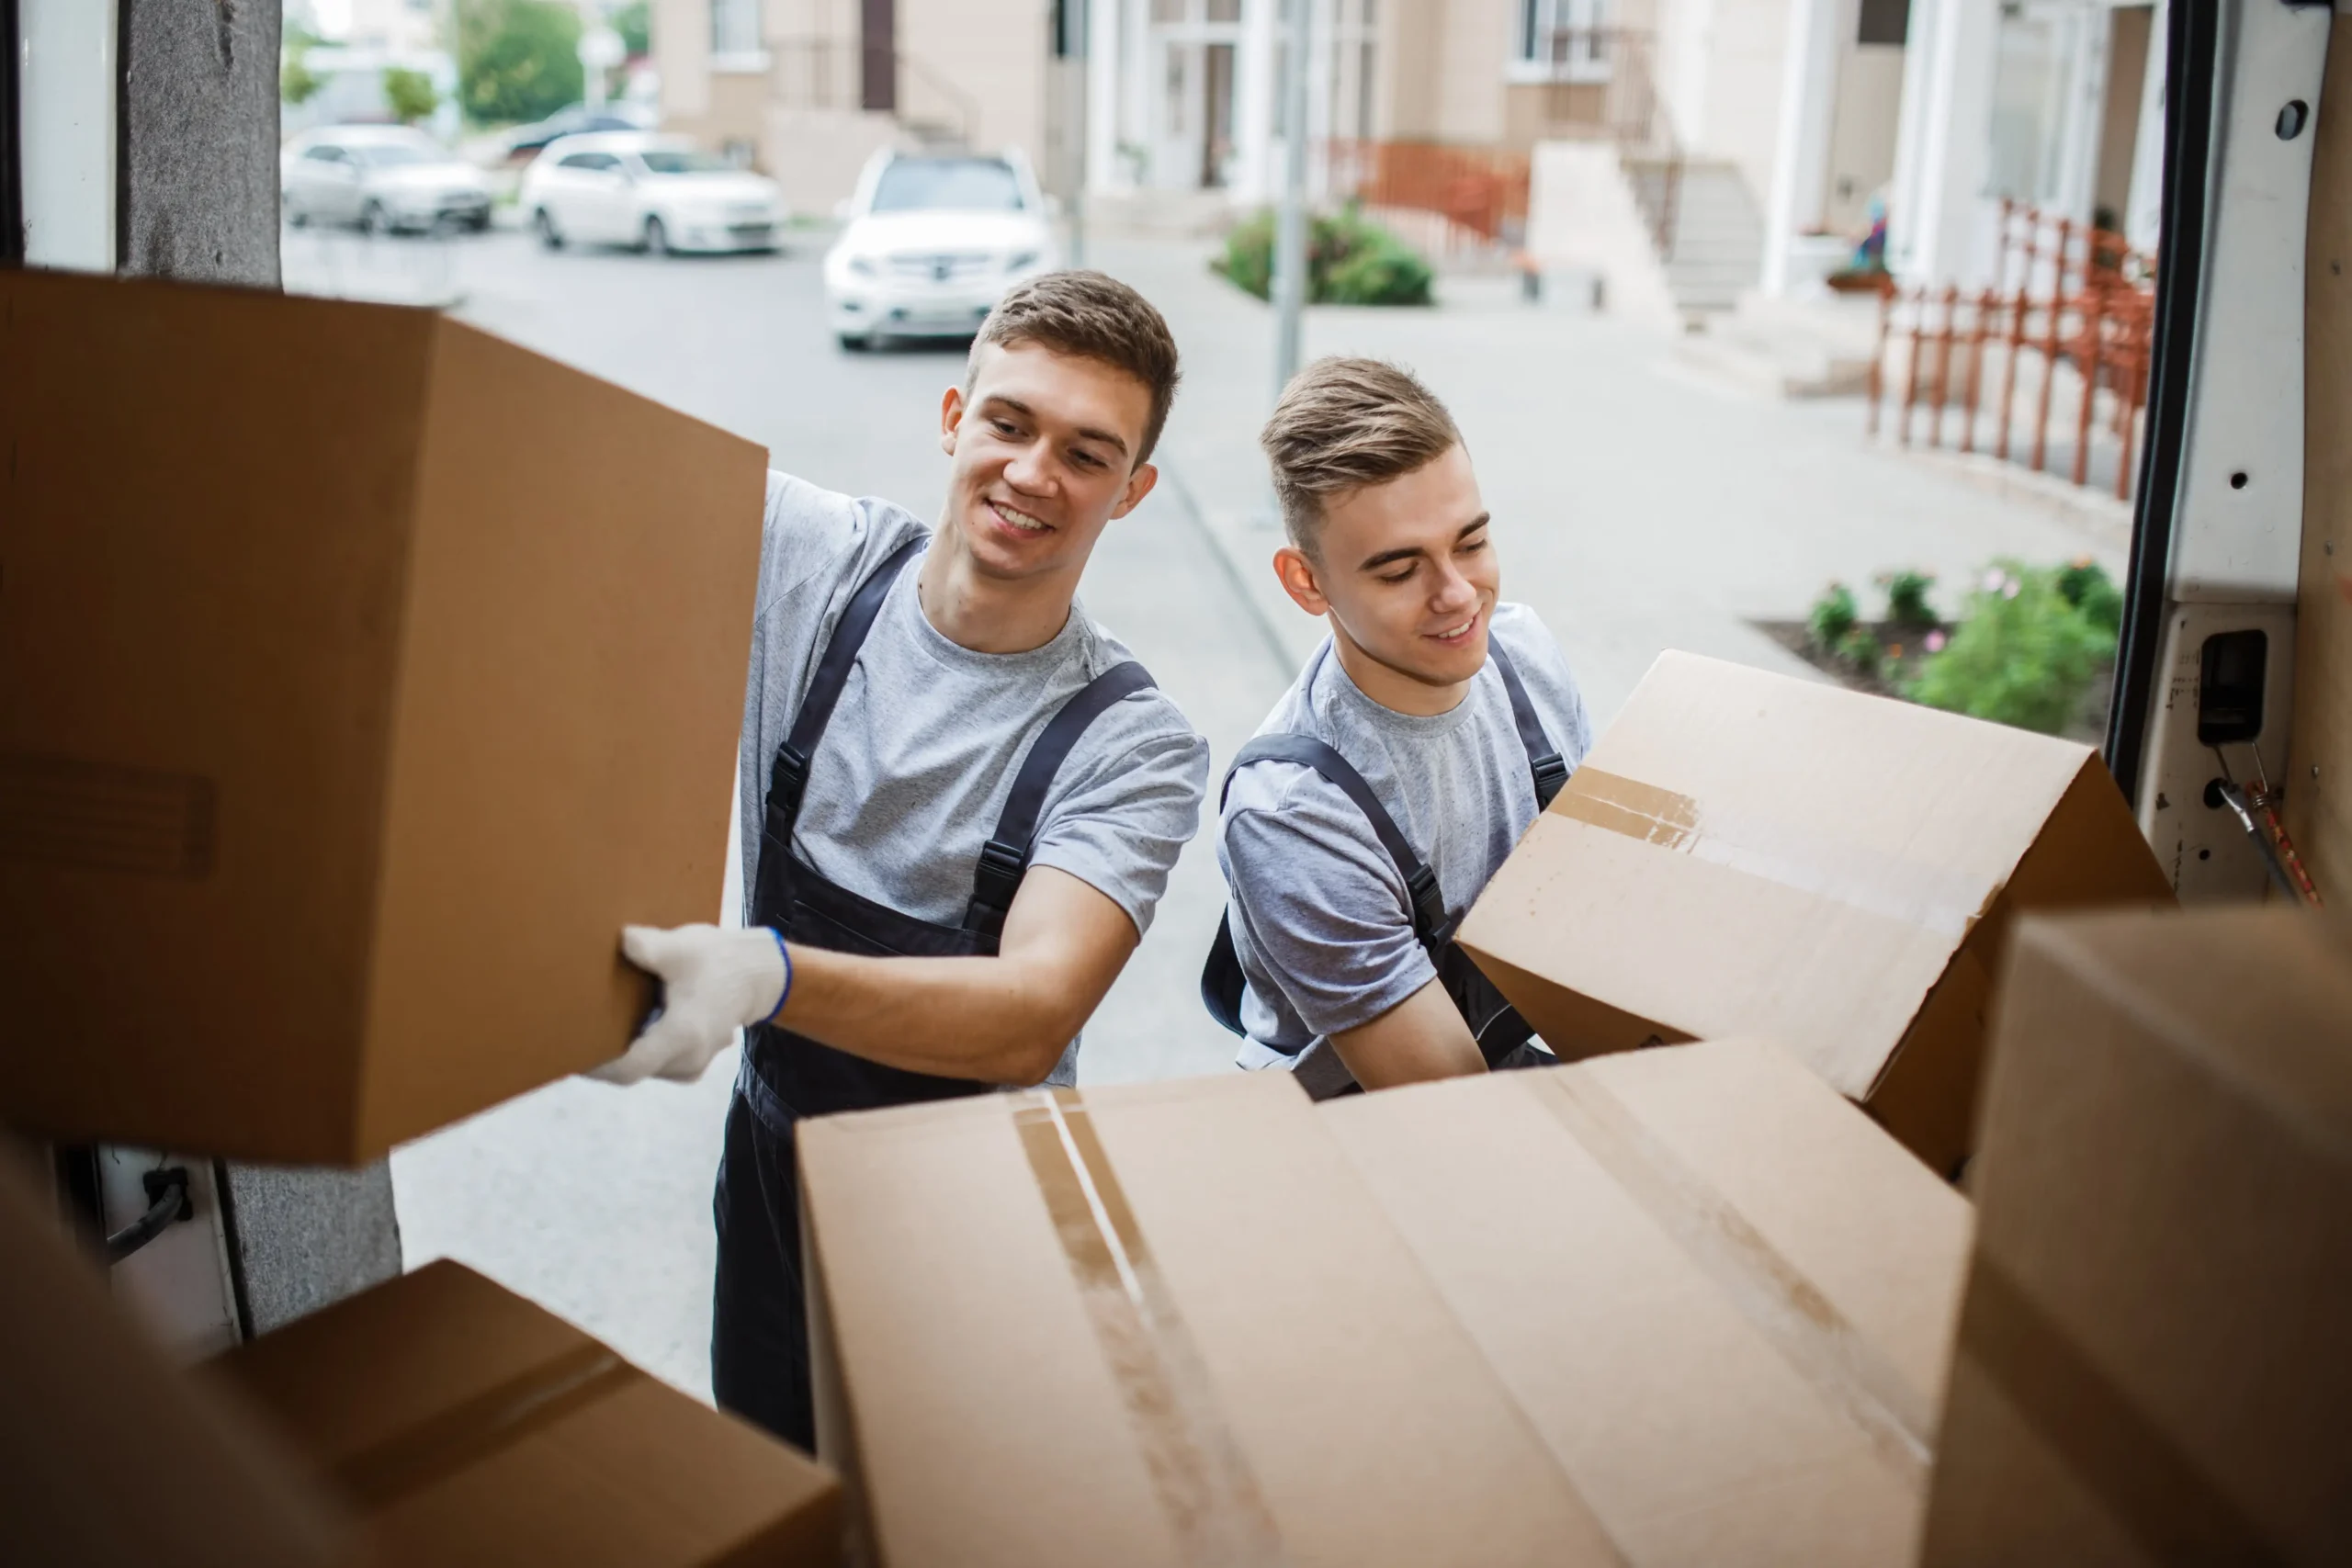 Get a Smooth Transition with Royal Sydney Removals